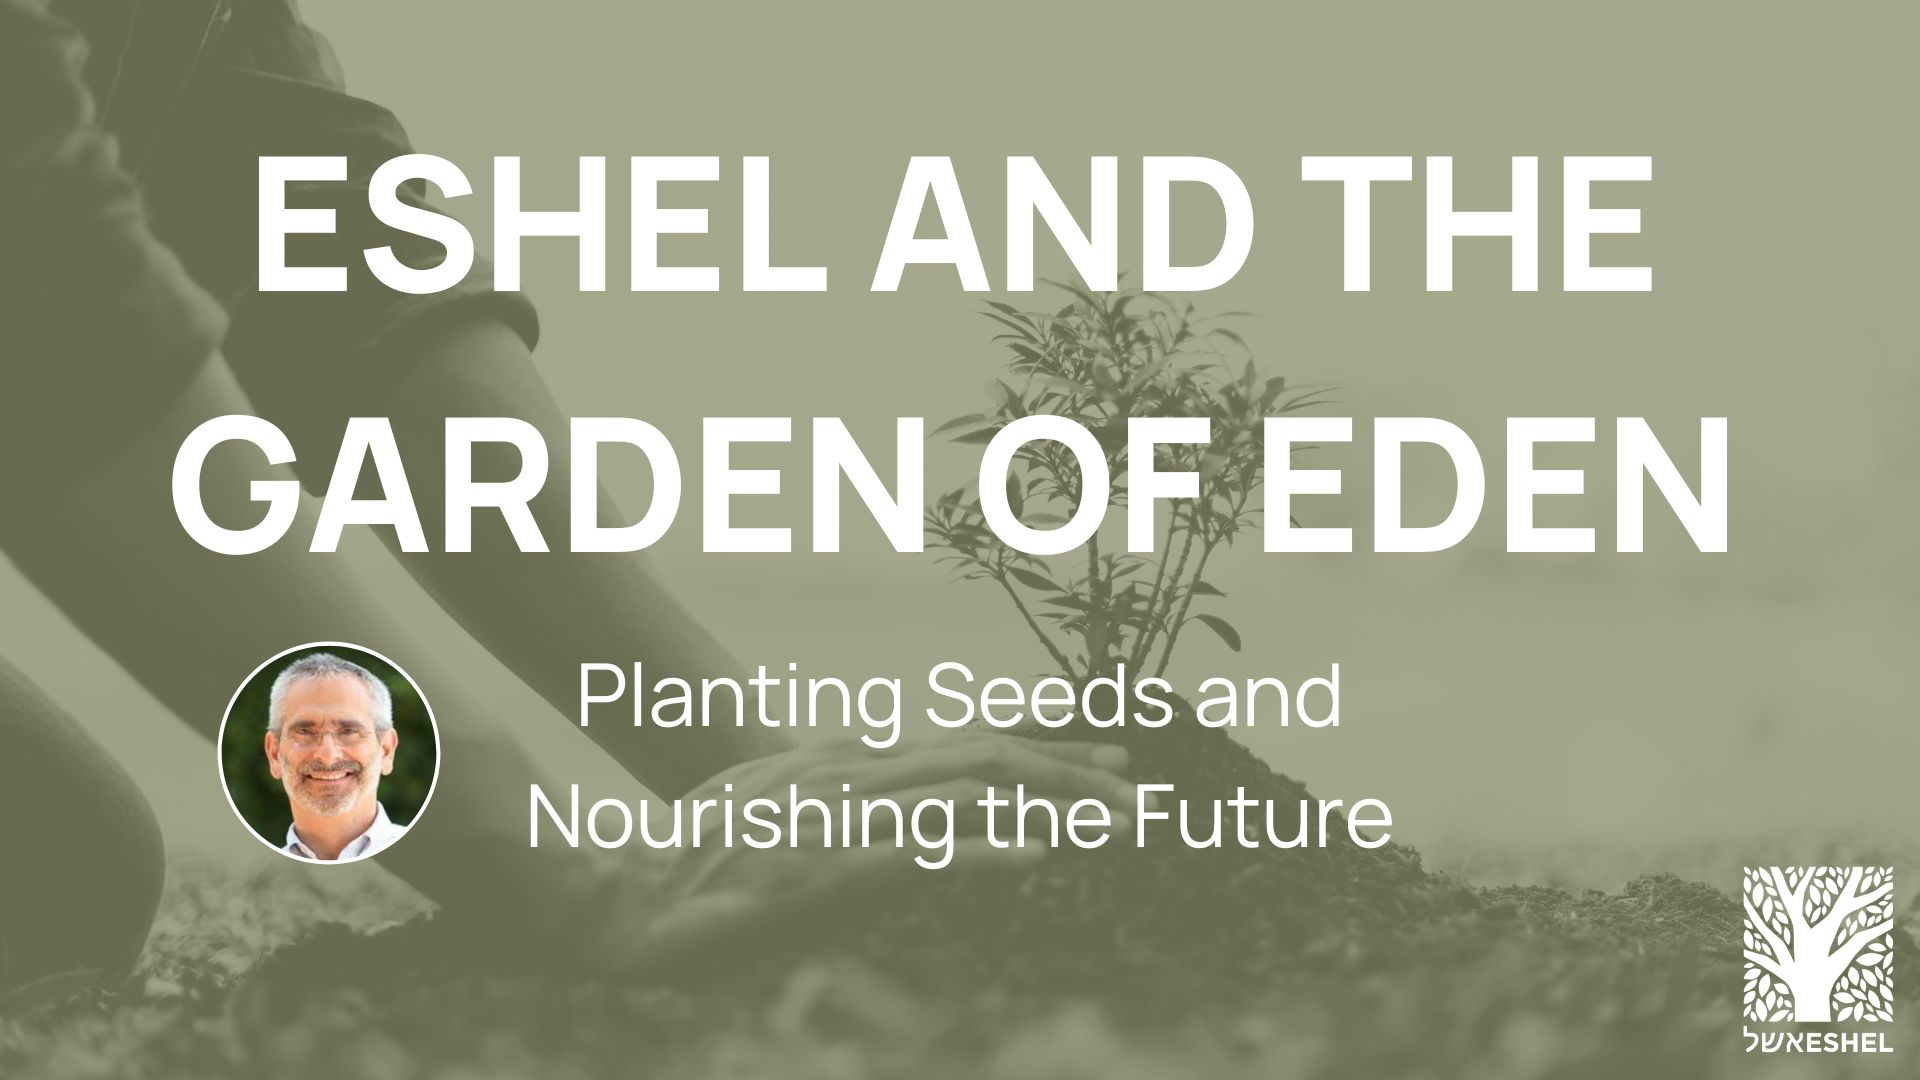 Eshel and the Garden of Eden: Planting Seeds and Nourishing the Future